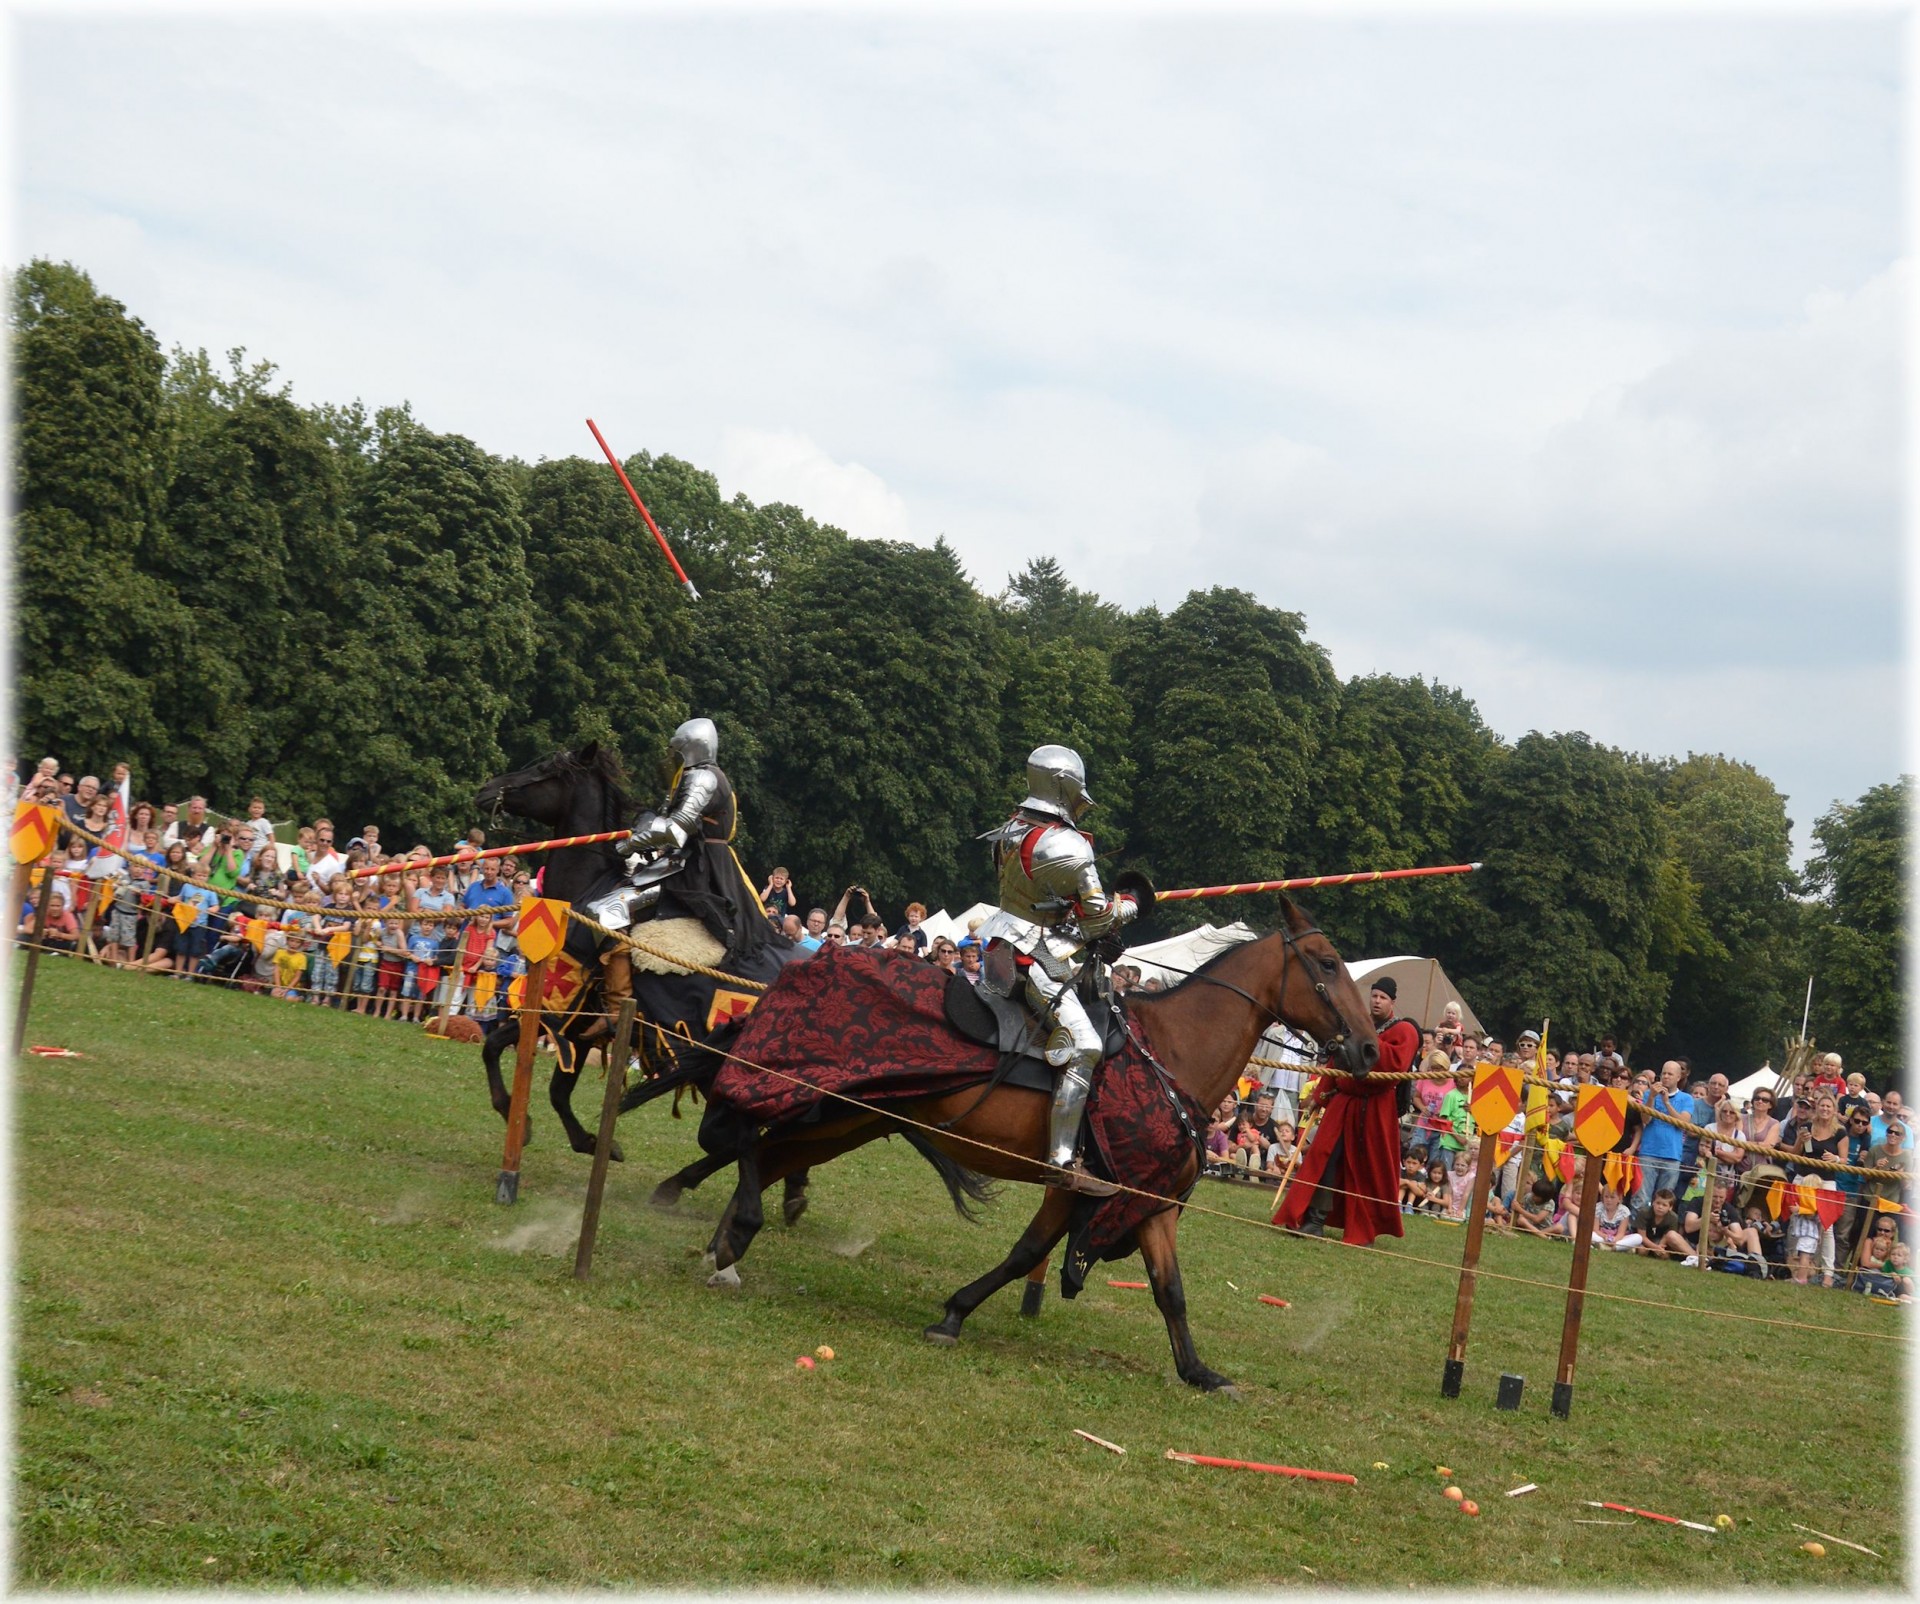 The jousting tournament, Series 2